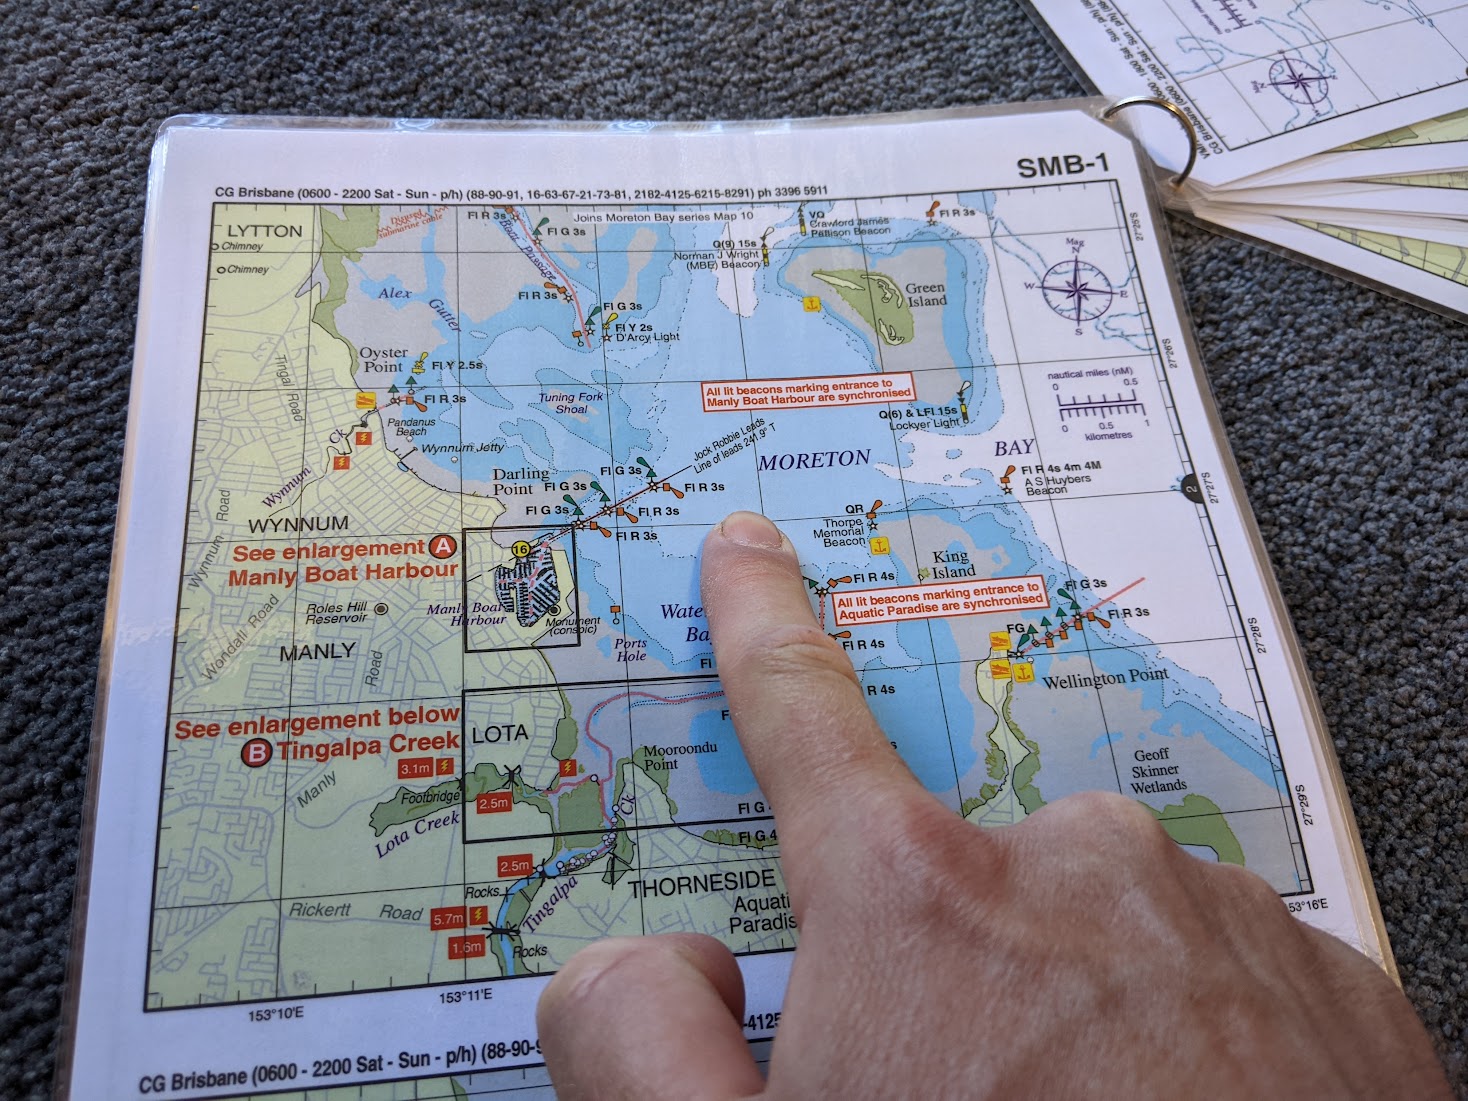 A photo of me pointing at "Moreton Bay" on a map.